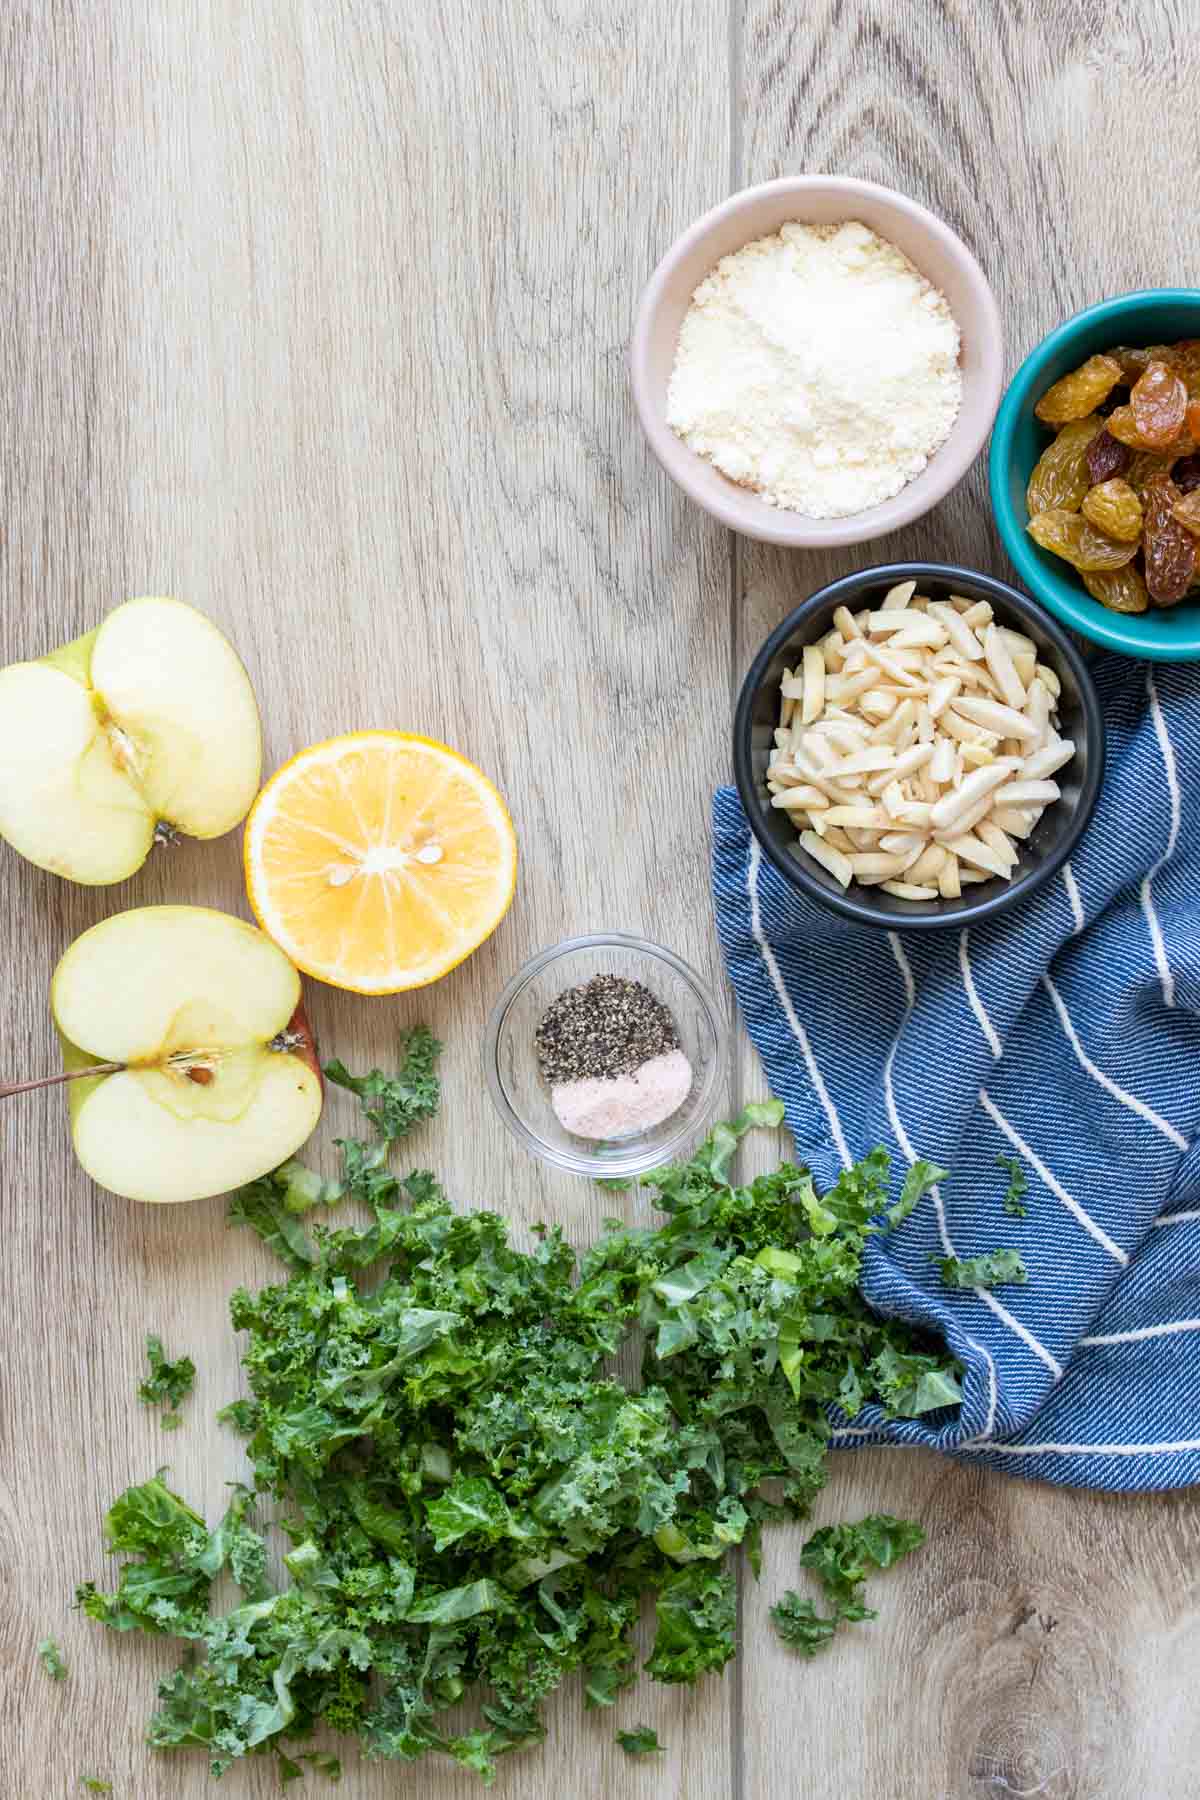 Ingredients to make a kale salad with apples, nuts, cheese and lemon on a wooden surface